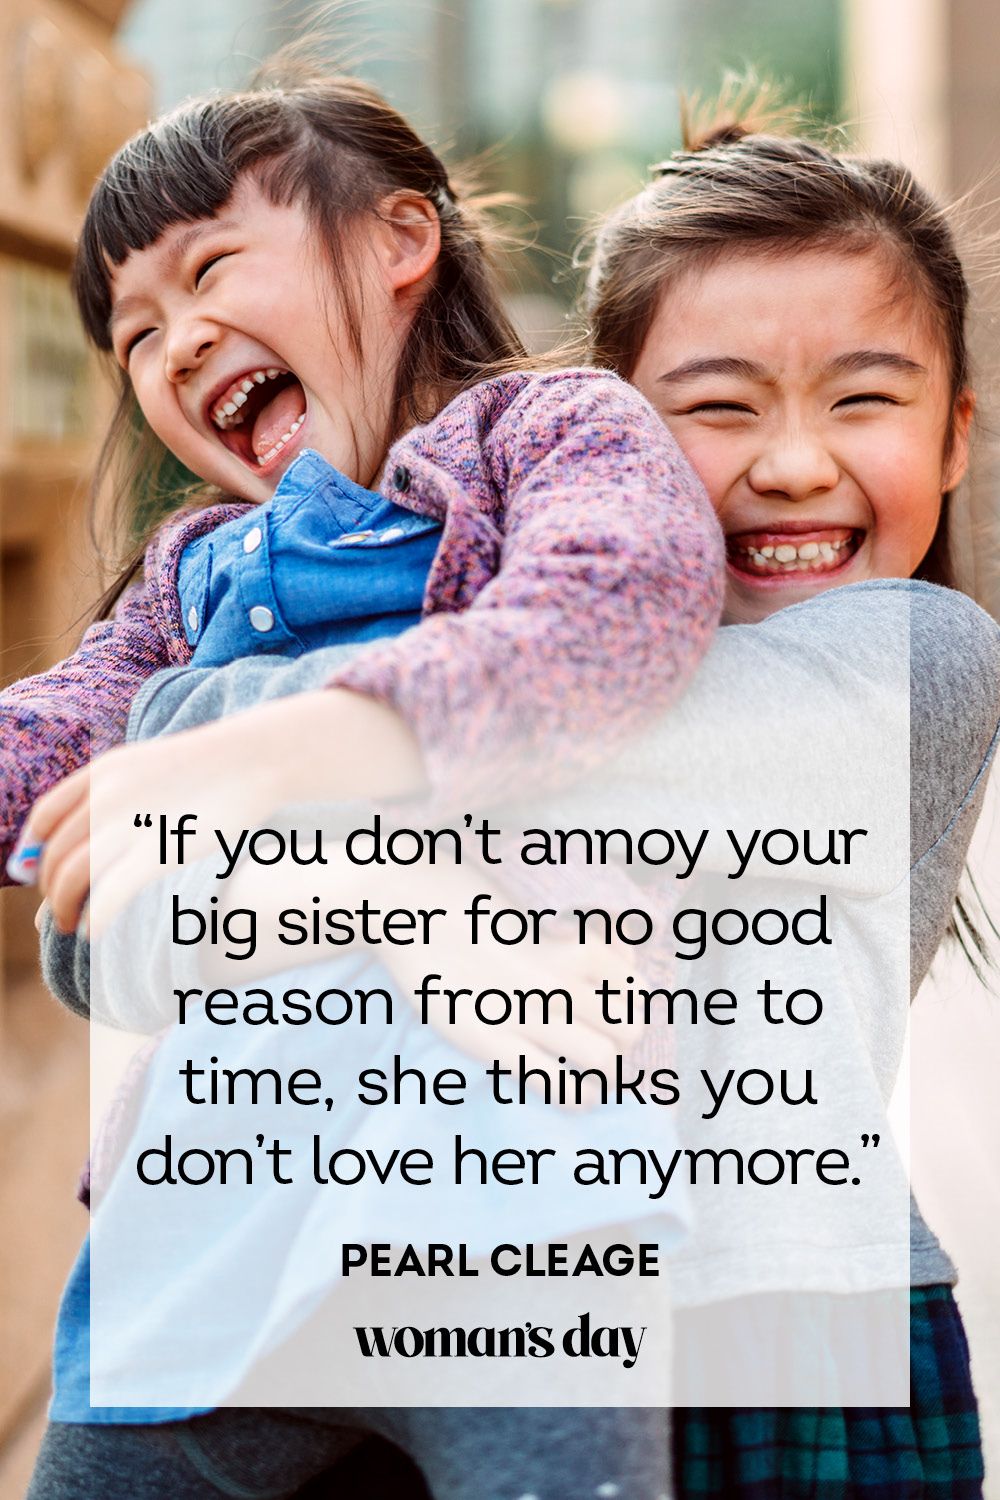 i love you sister quotes and sayings